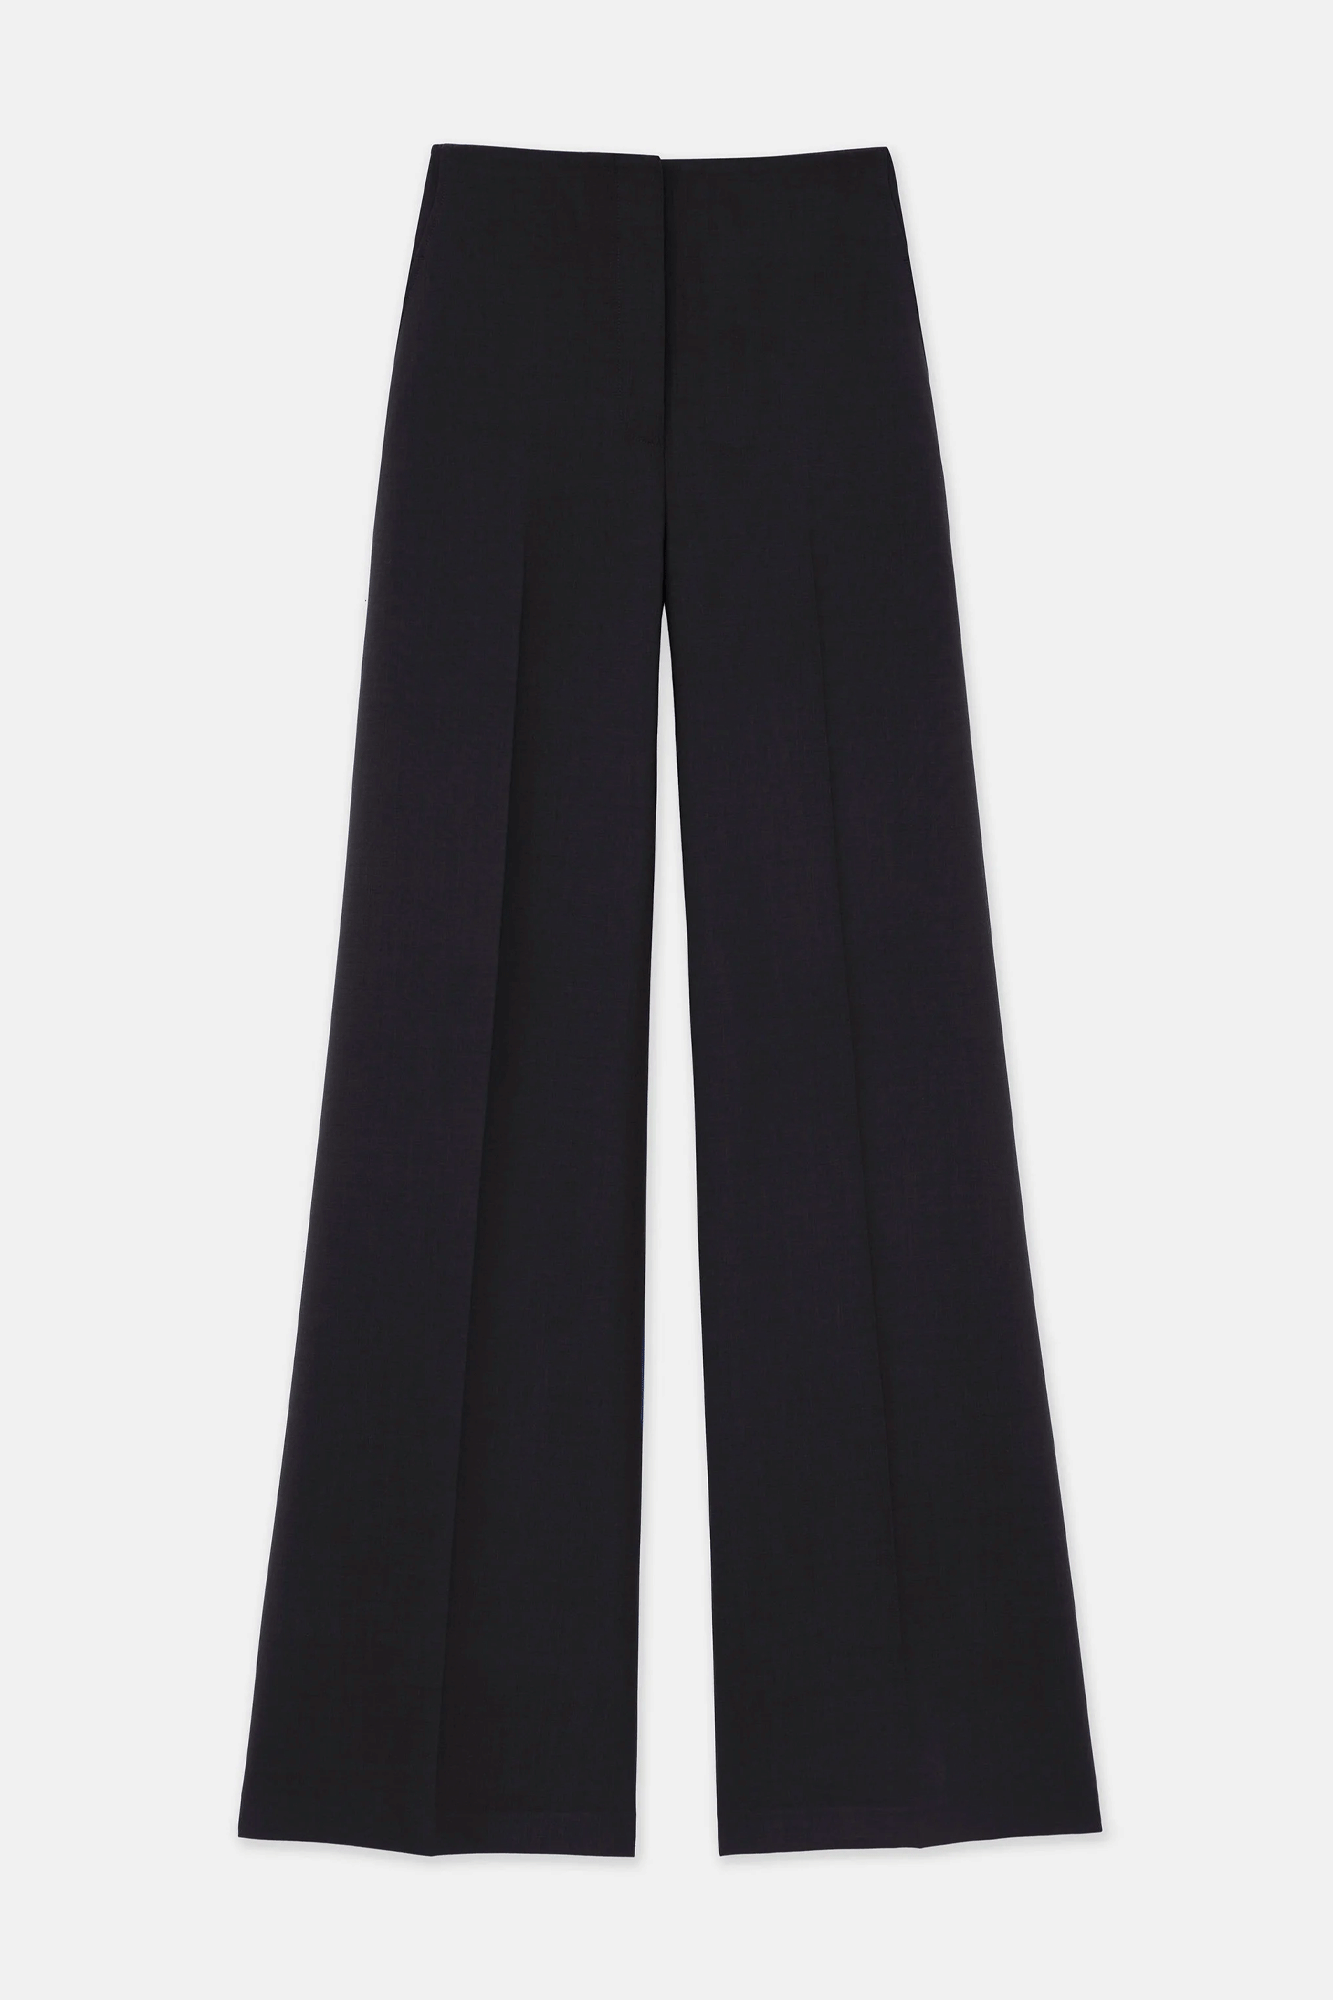 The Thames Wide Leg Pant from Lafayette 148 offers an elegant silhouette with all-day comfort. Cut from Italian double face wool fabric infused with stretch and tailored with a waist-defining high rise, these pants feature a notched waistband and back buckle tab for an impeccably polished look. Streamlined and sophisticated, you can take on the day in style.